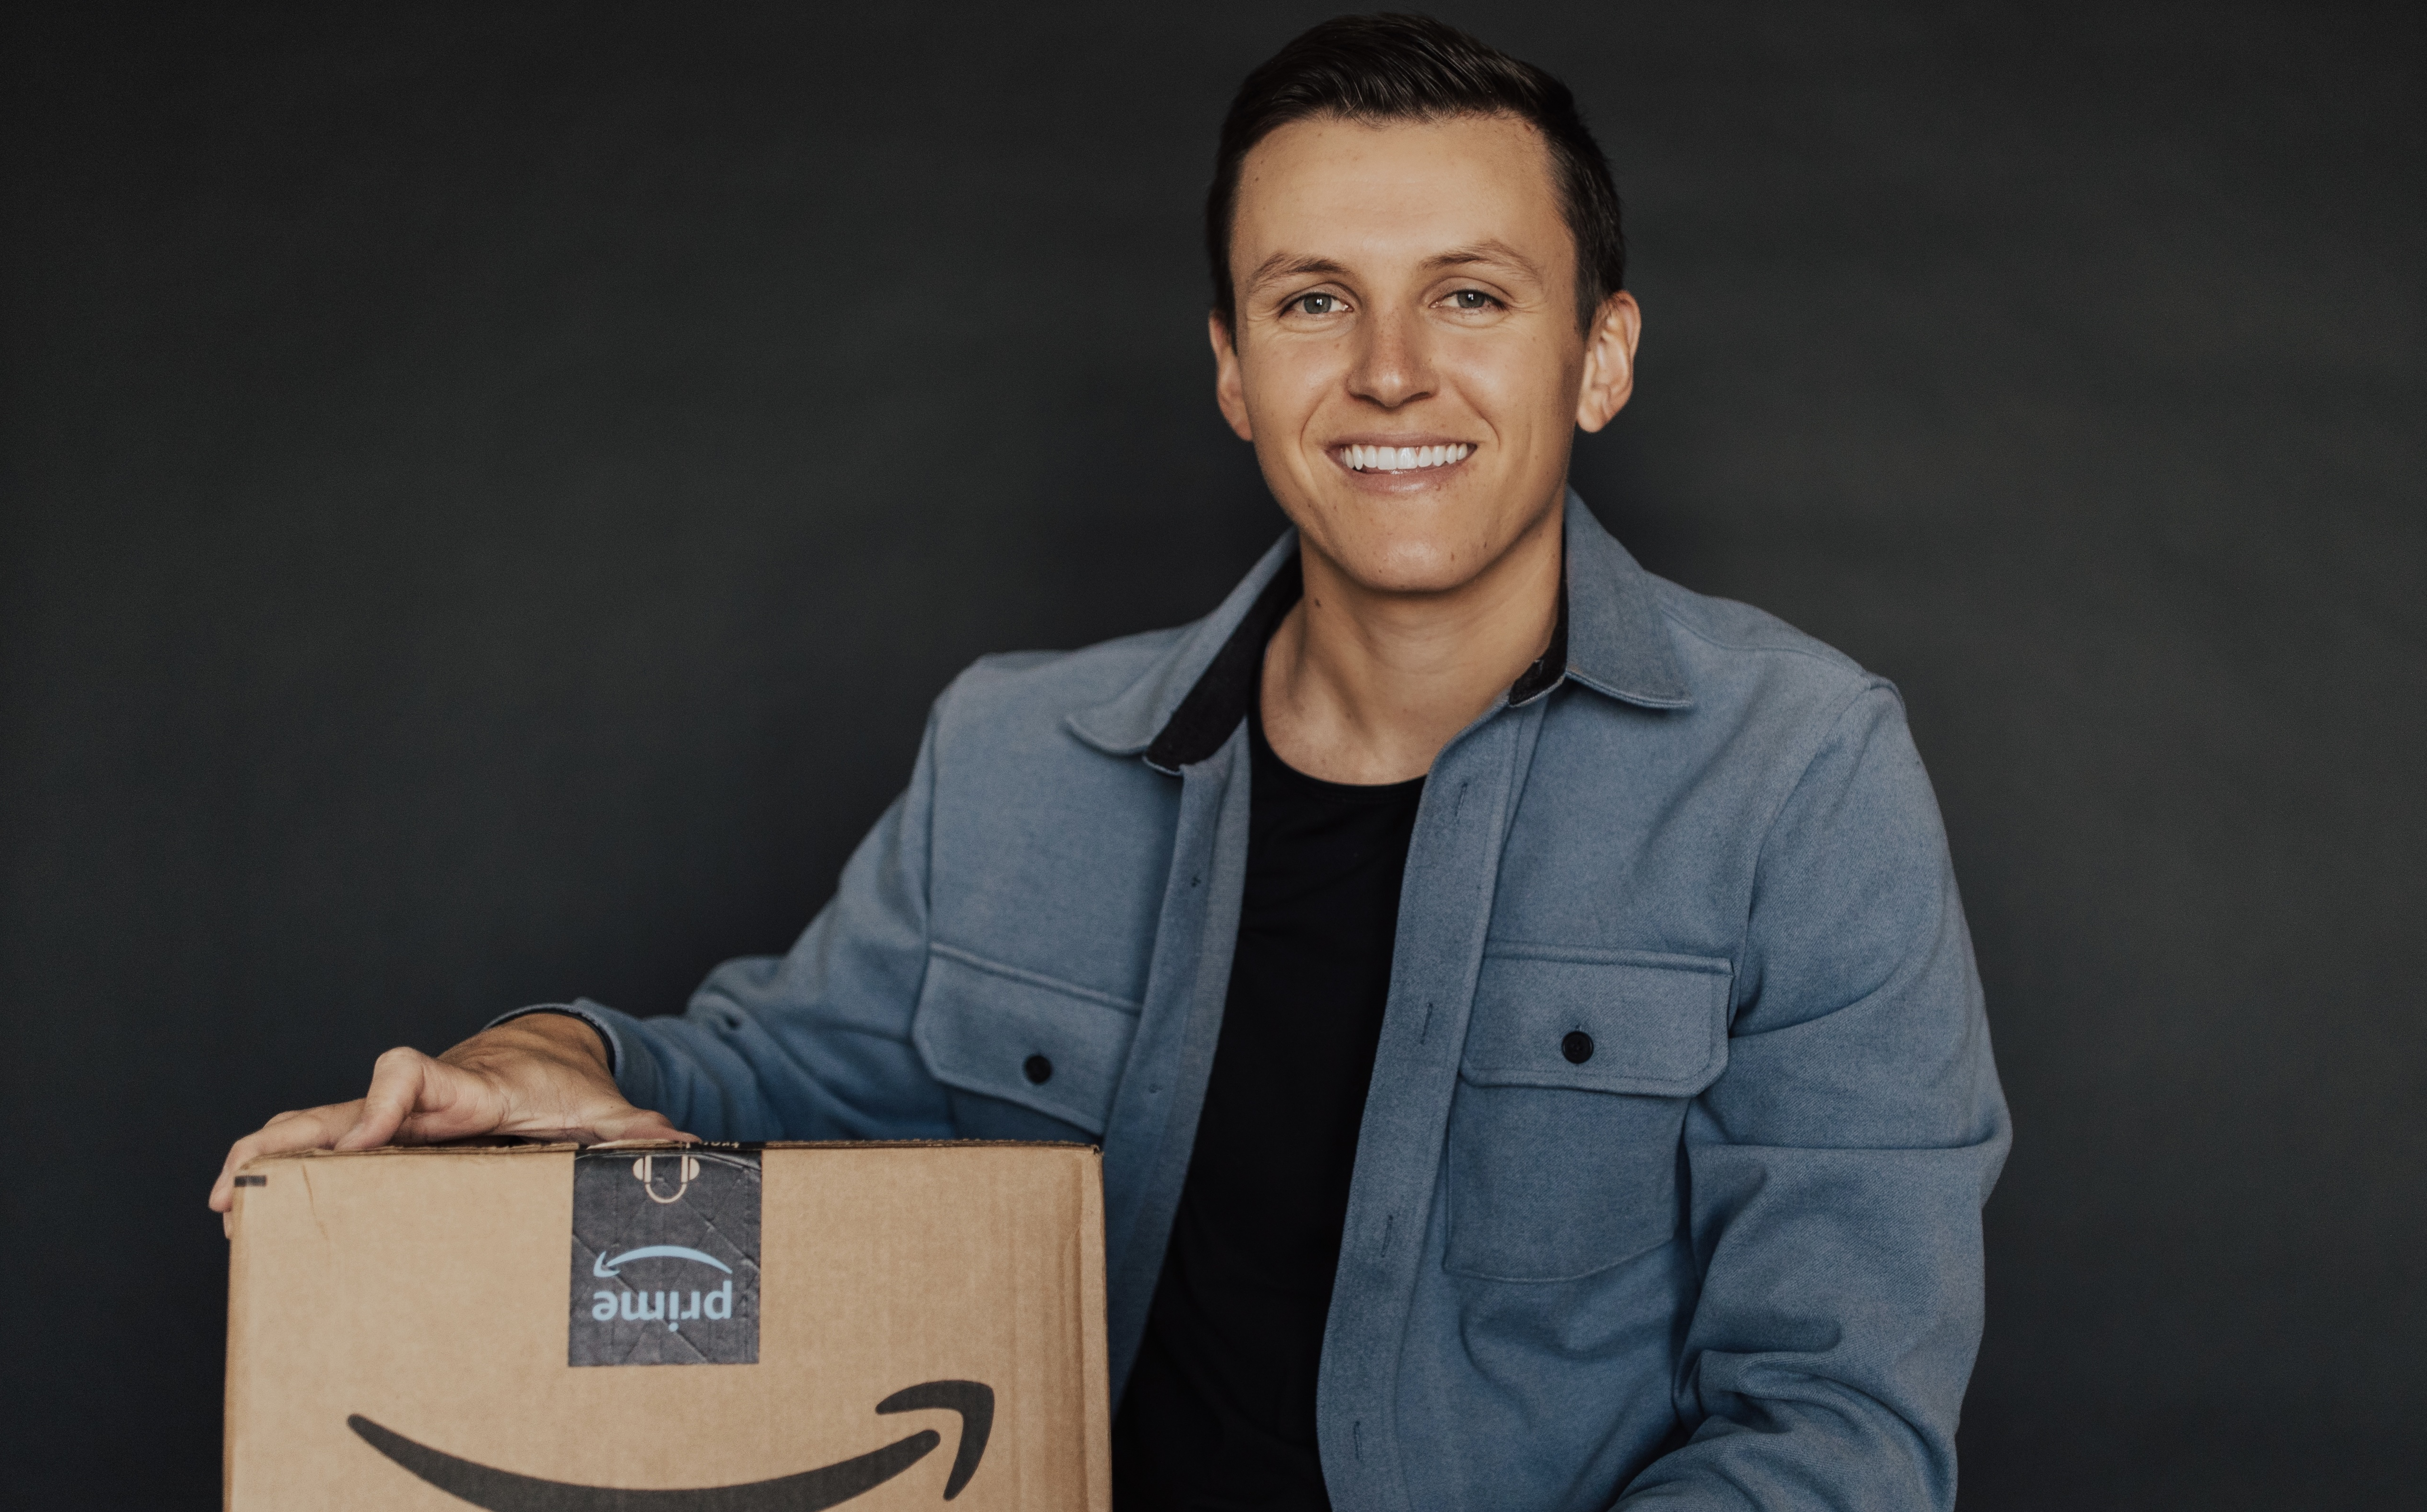 Meet Trevin Peterson, 7 Figure Amazon Seller Who is Helping Others Start Their Own Businesses on Amazon